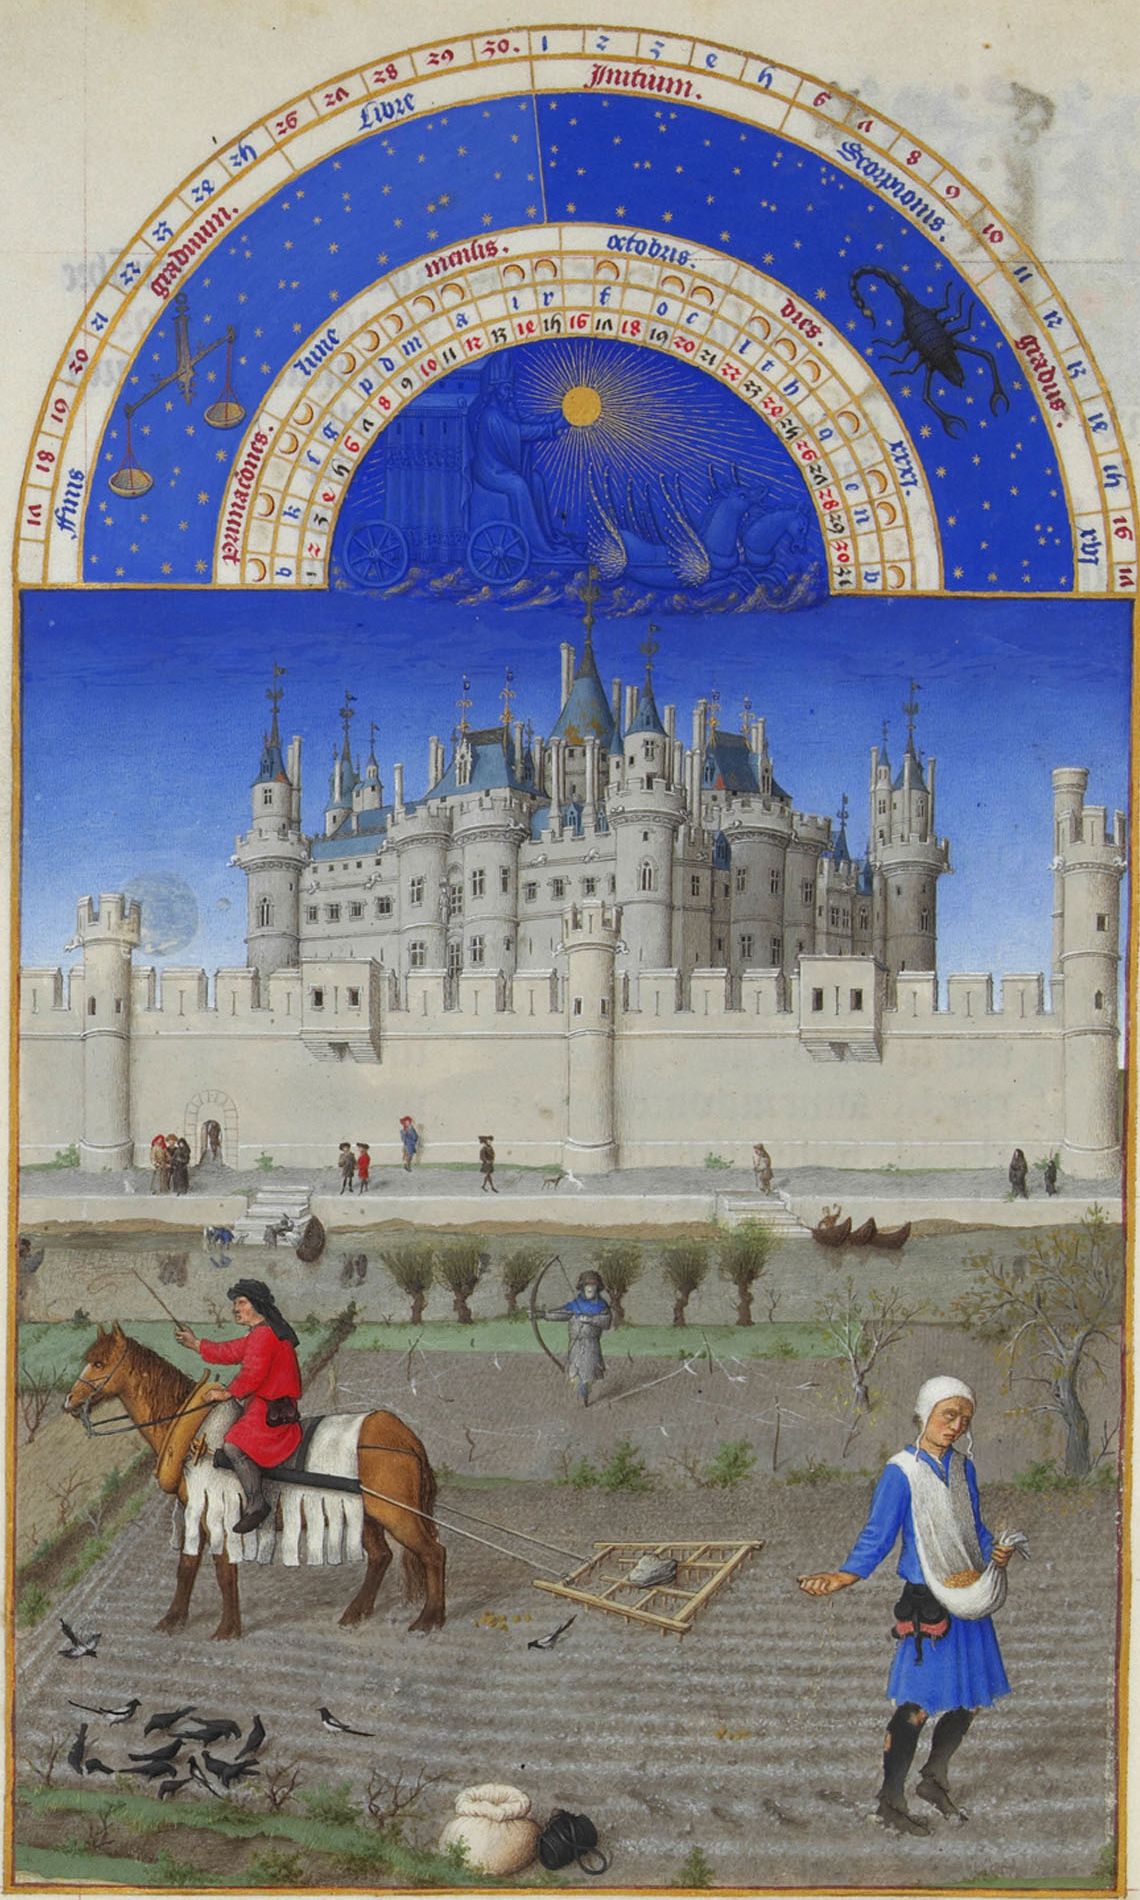 Limbourg Brothers, "The Book of Hours." Sowing of winter crops.